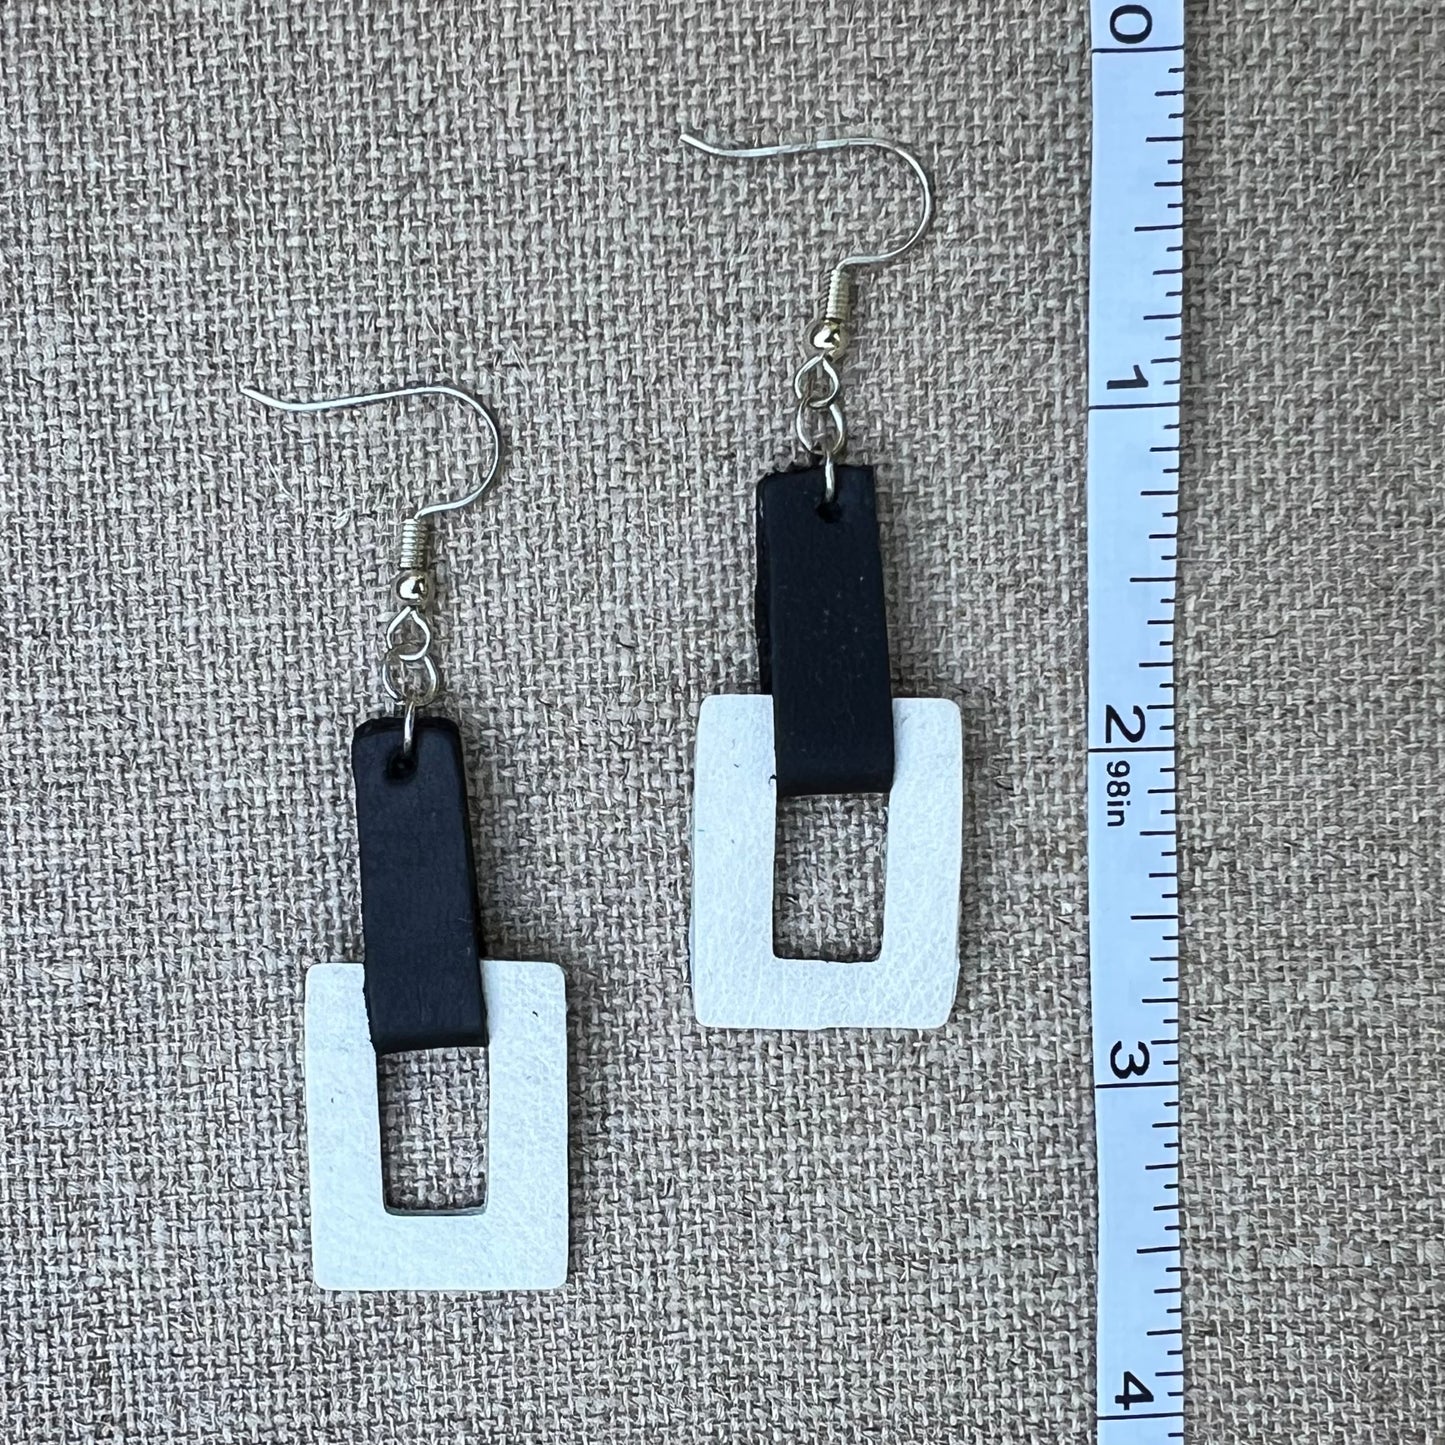 Two-Toned Reclaimed Leather Earrings (More Colors Available)